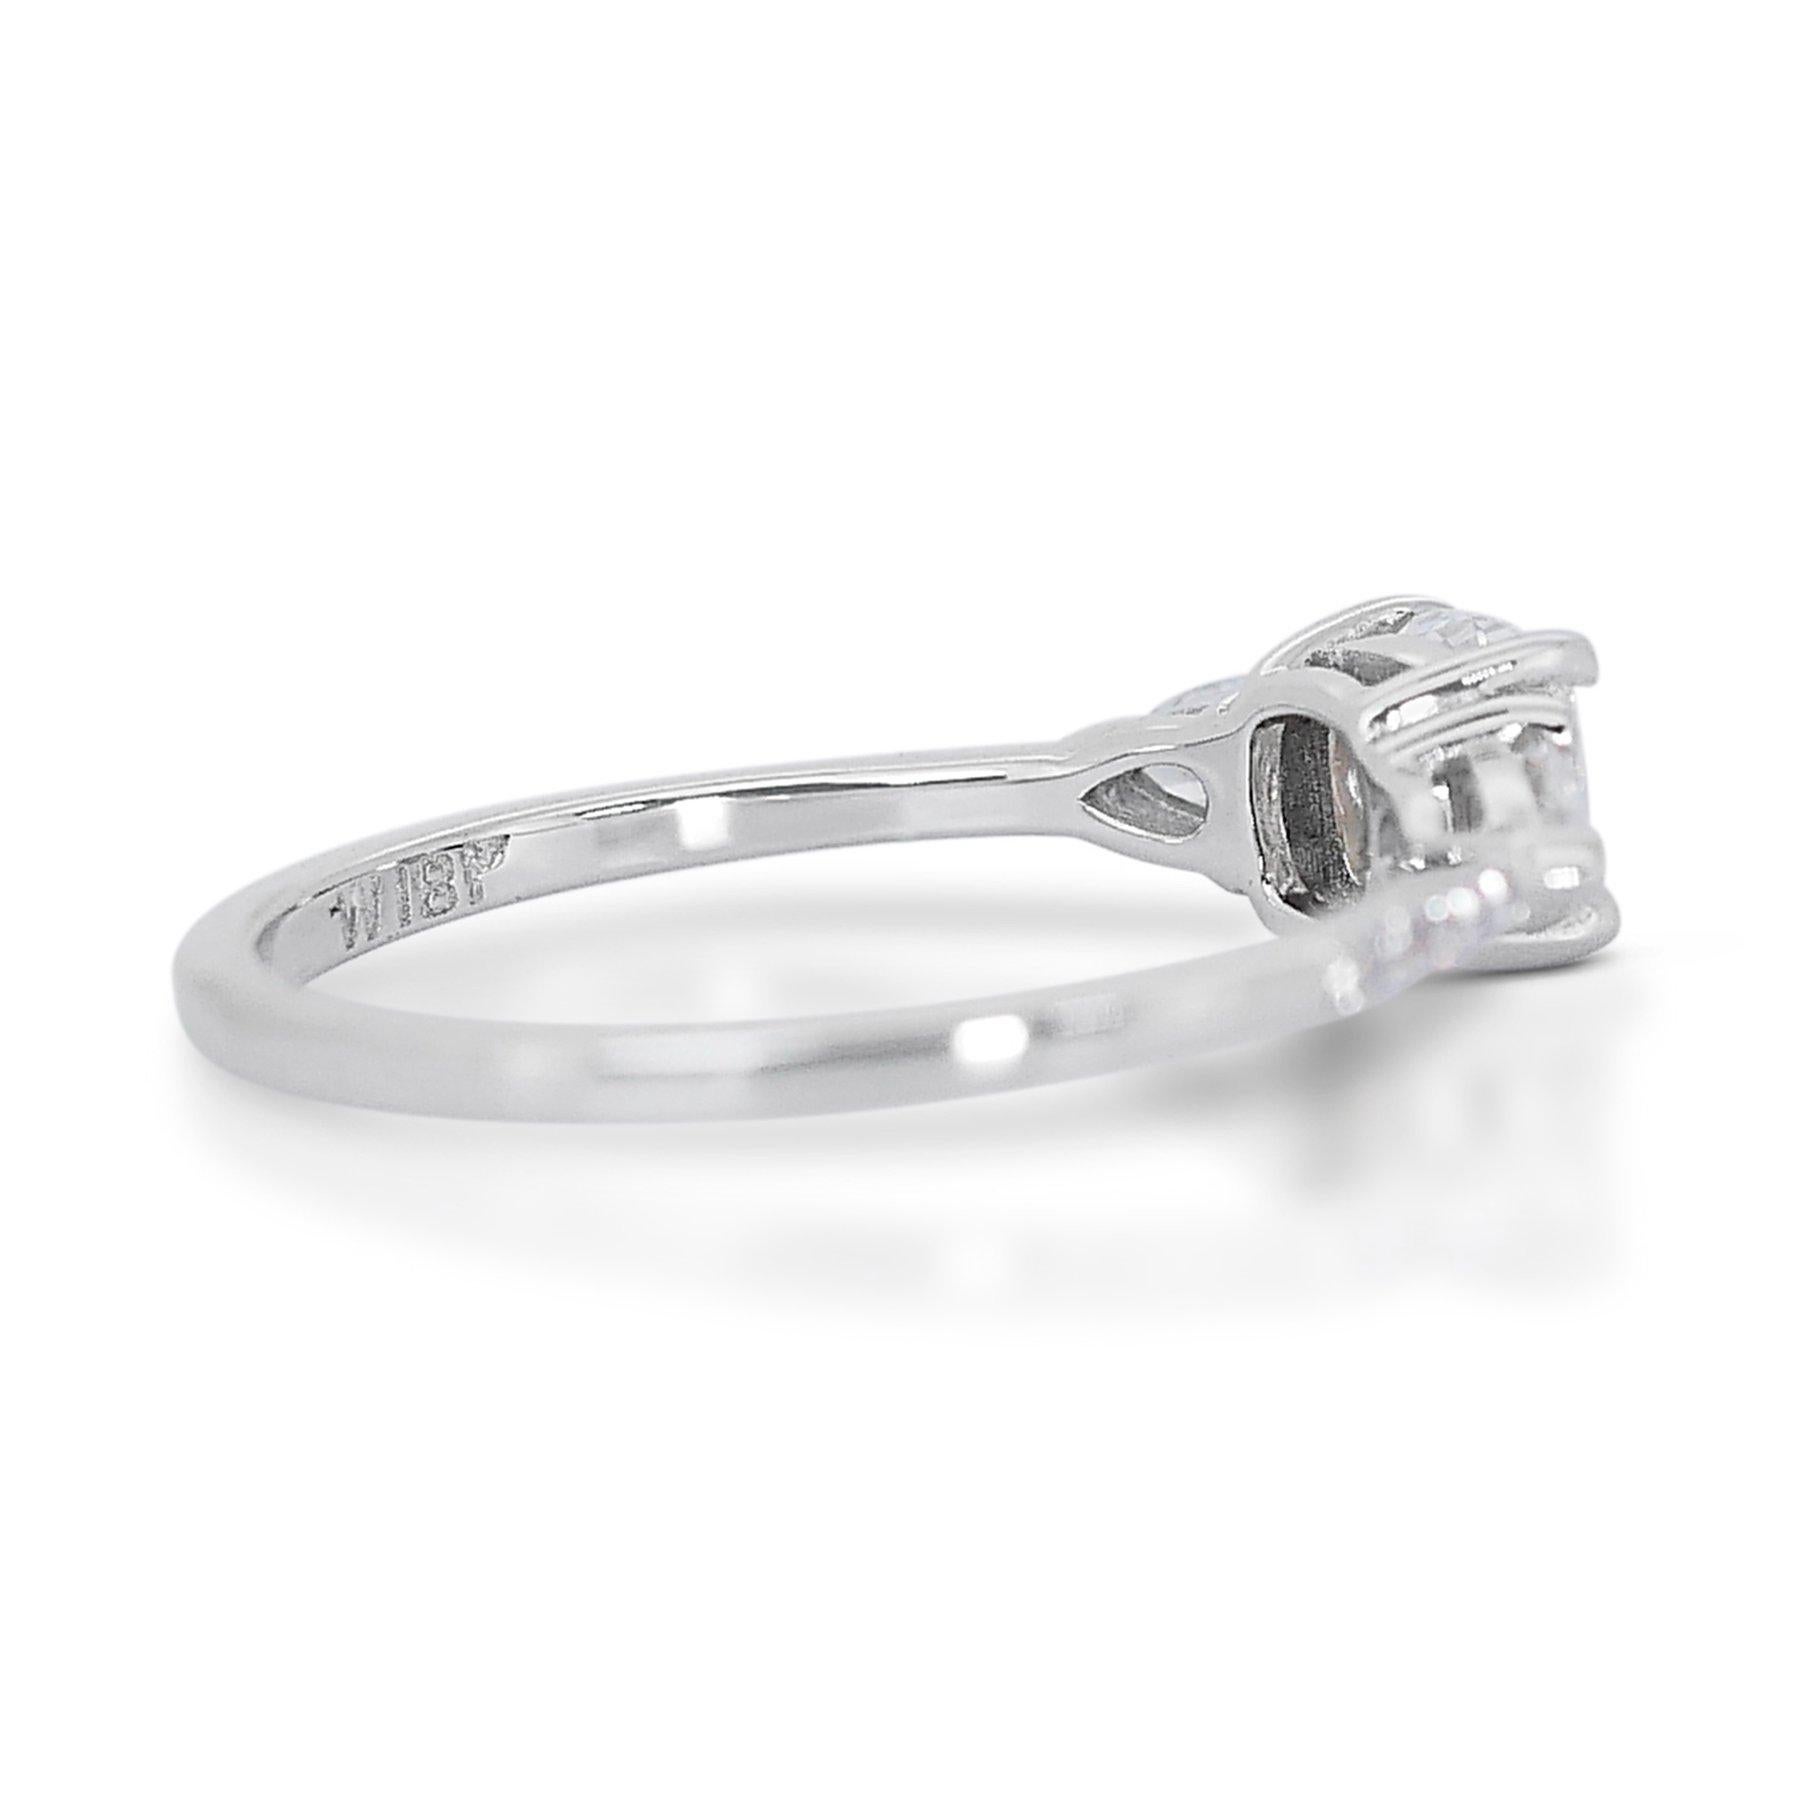 Captivating 0.73ct Diamond 3-Stone Ring in 18k White Gold - GIA Certified For Sale 2